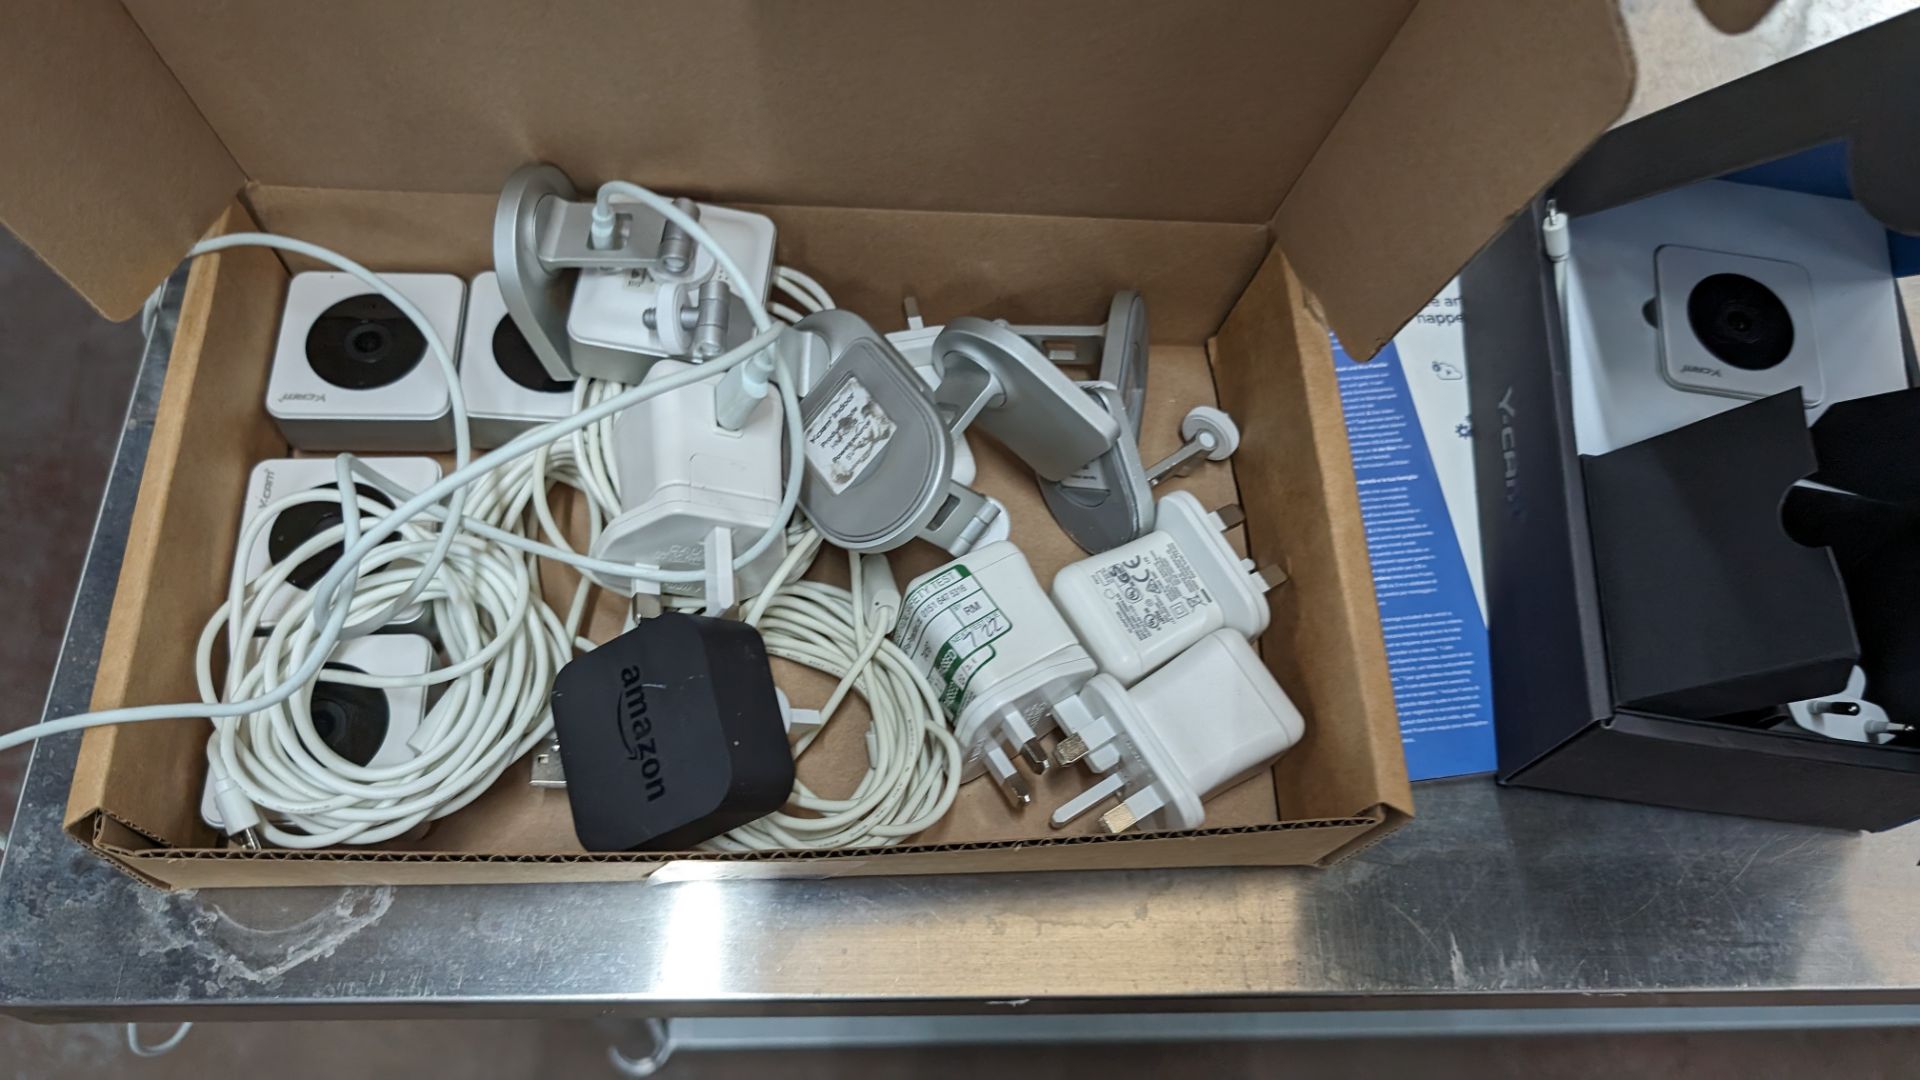 6 off Y-cam cameras, each including a charging cable, charger and mounting bracket - Image 8 of 9